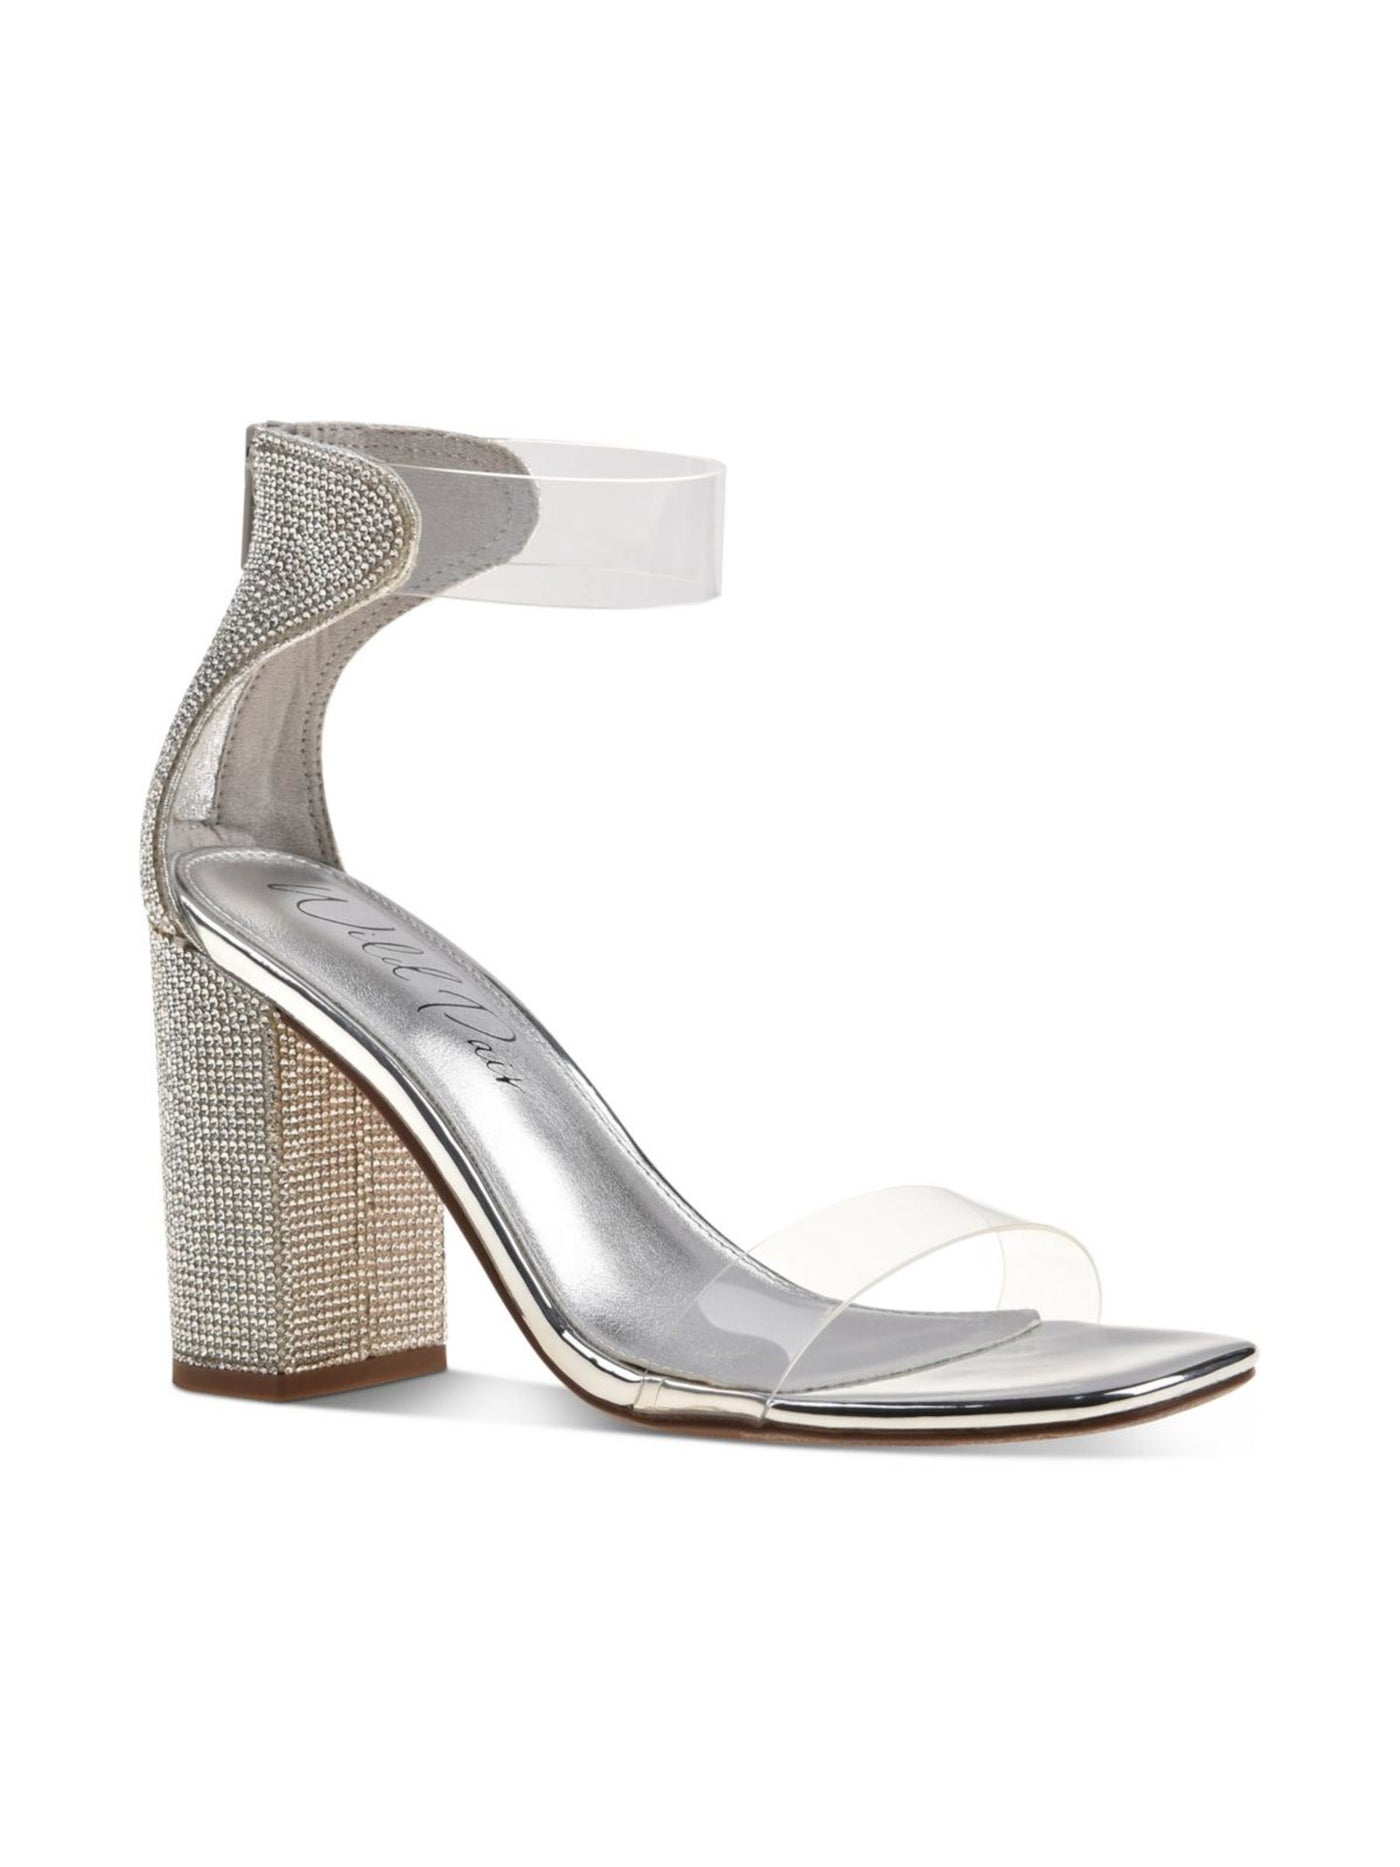 WILD PAIR Womens Silver Embellished Padded Trixiee Square Toe Block Heel Zip-Up Dress Heeled Sandal 12 M